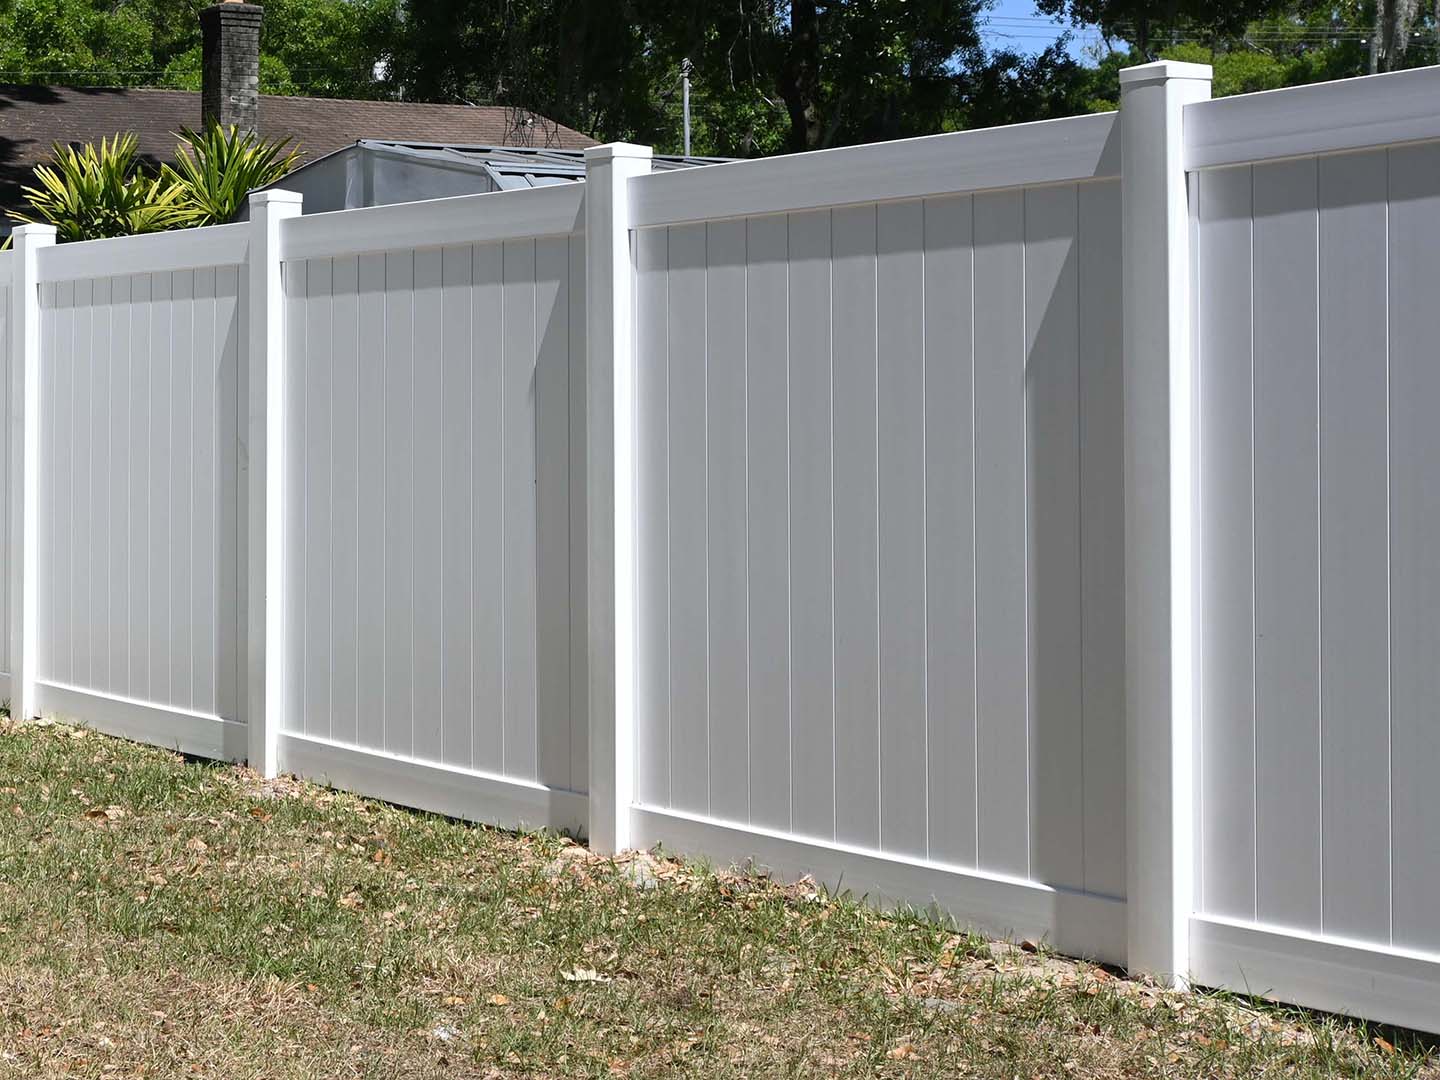 Photo of a Tampa FL vinyl fence